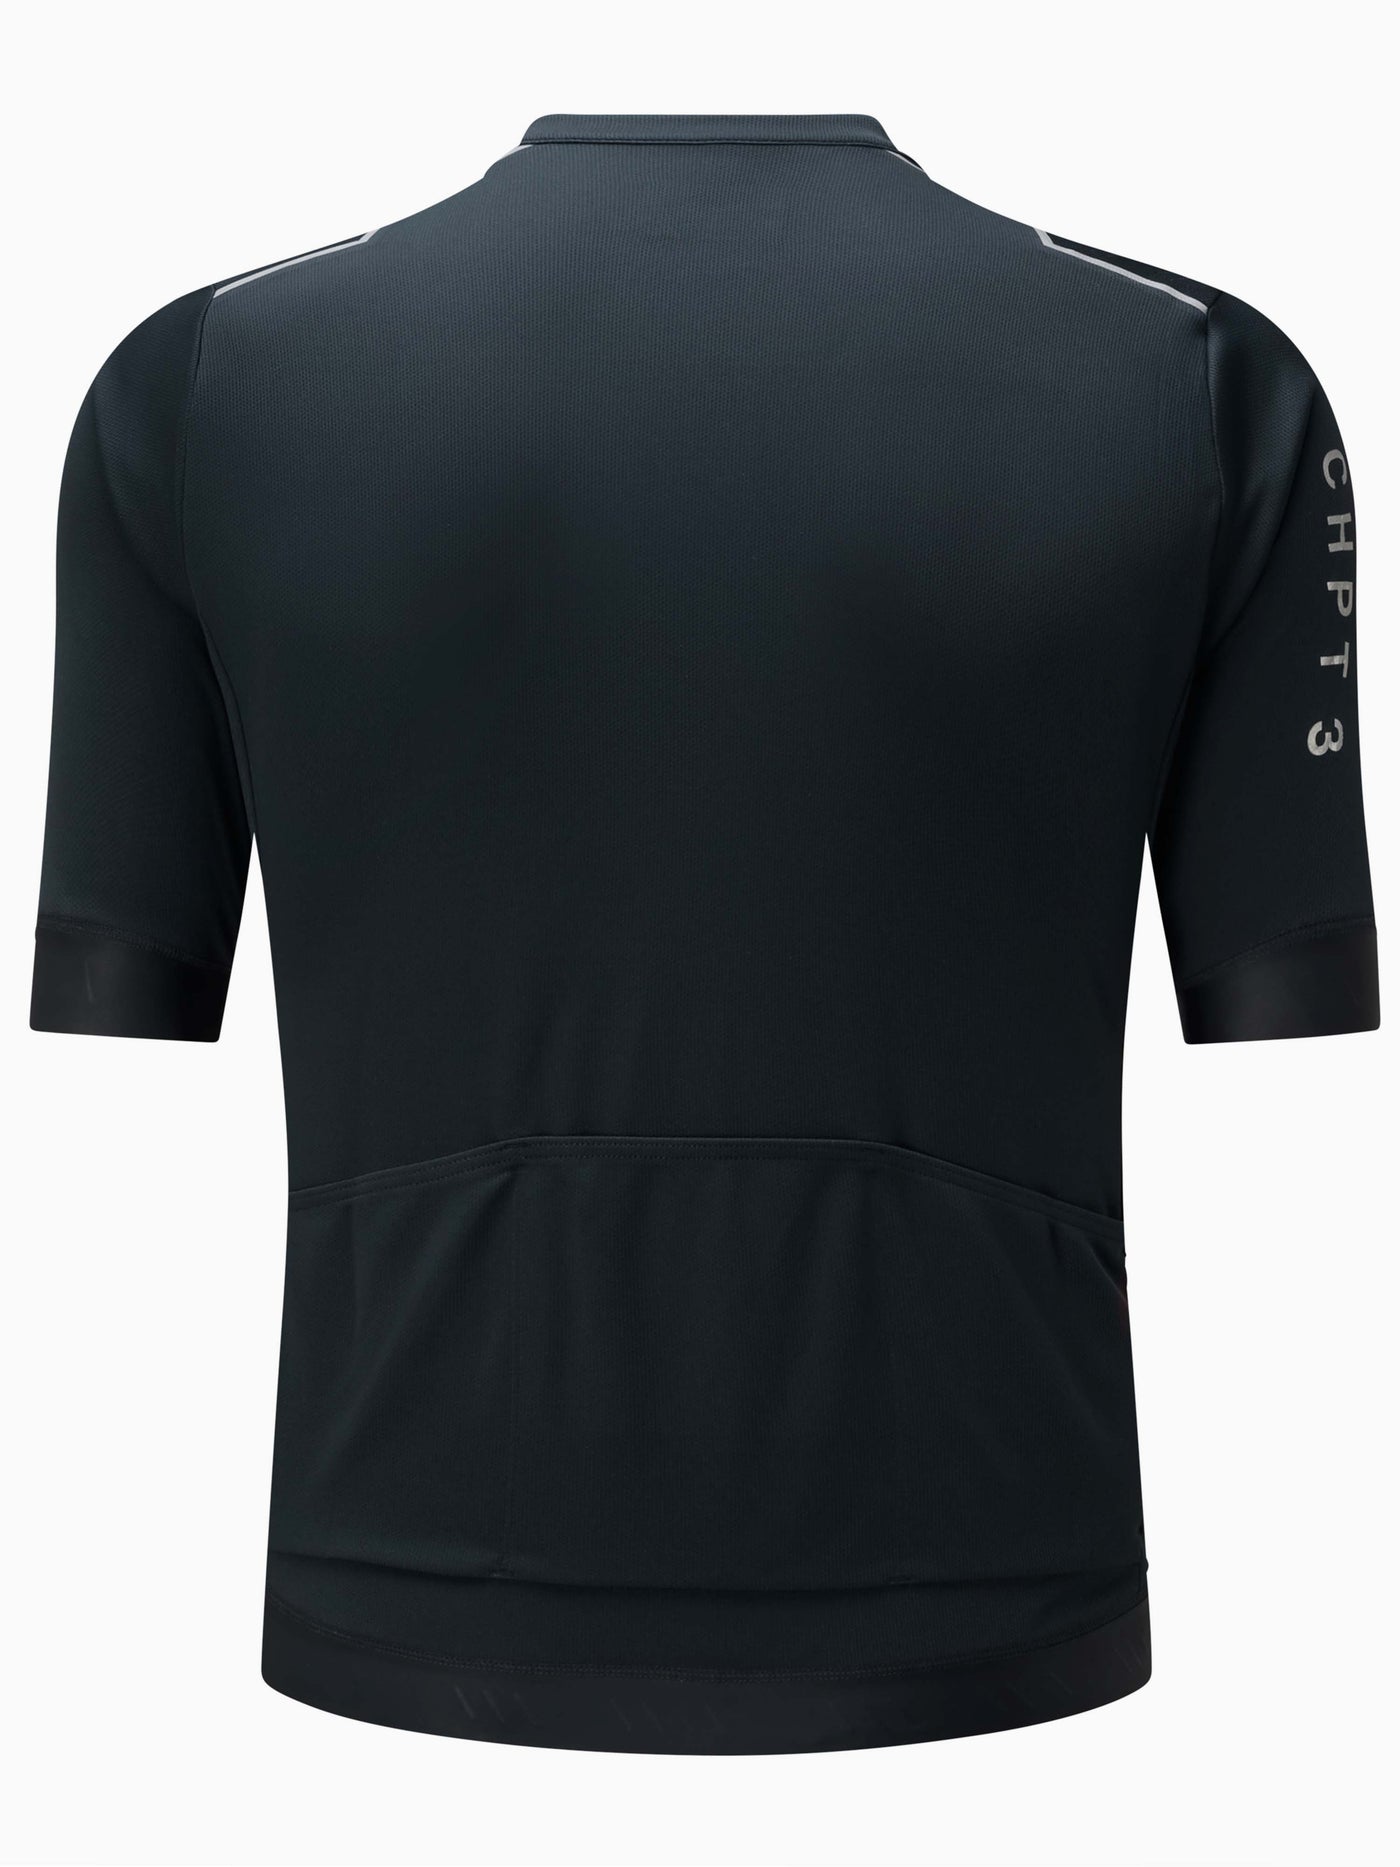 Flat photo from rear of CHPT3 Men's Most Days jersey in Carbon Black#color_carbon-black